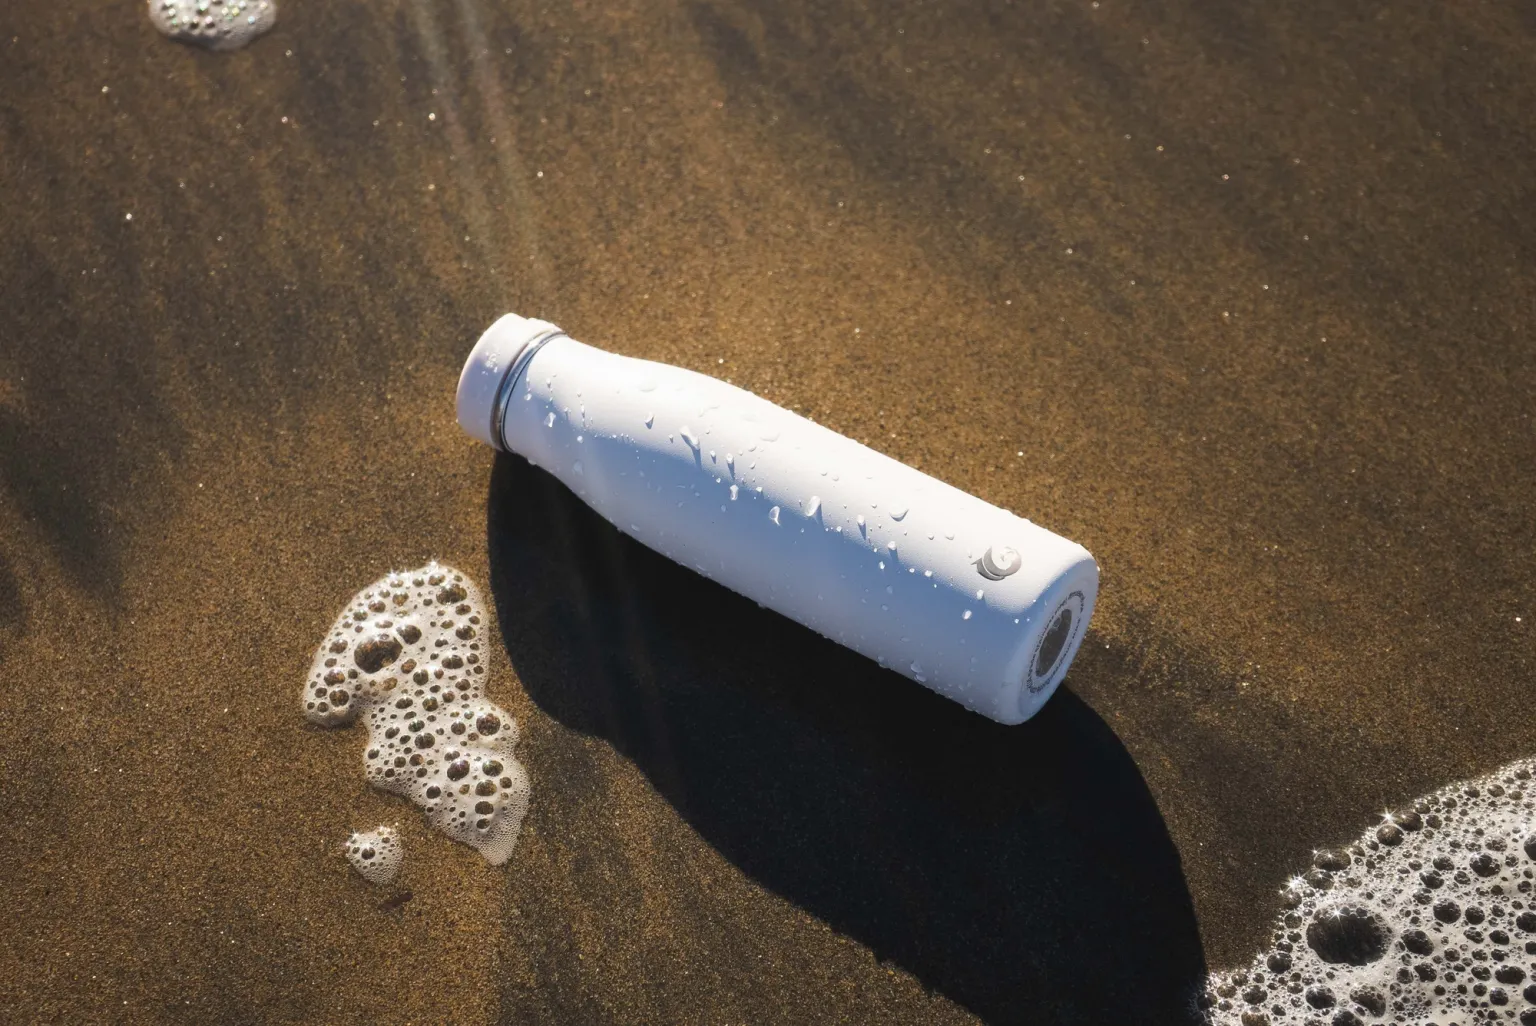 Ocean-friendly drinks bottles for every occasion